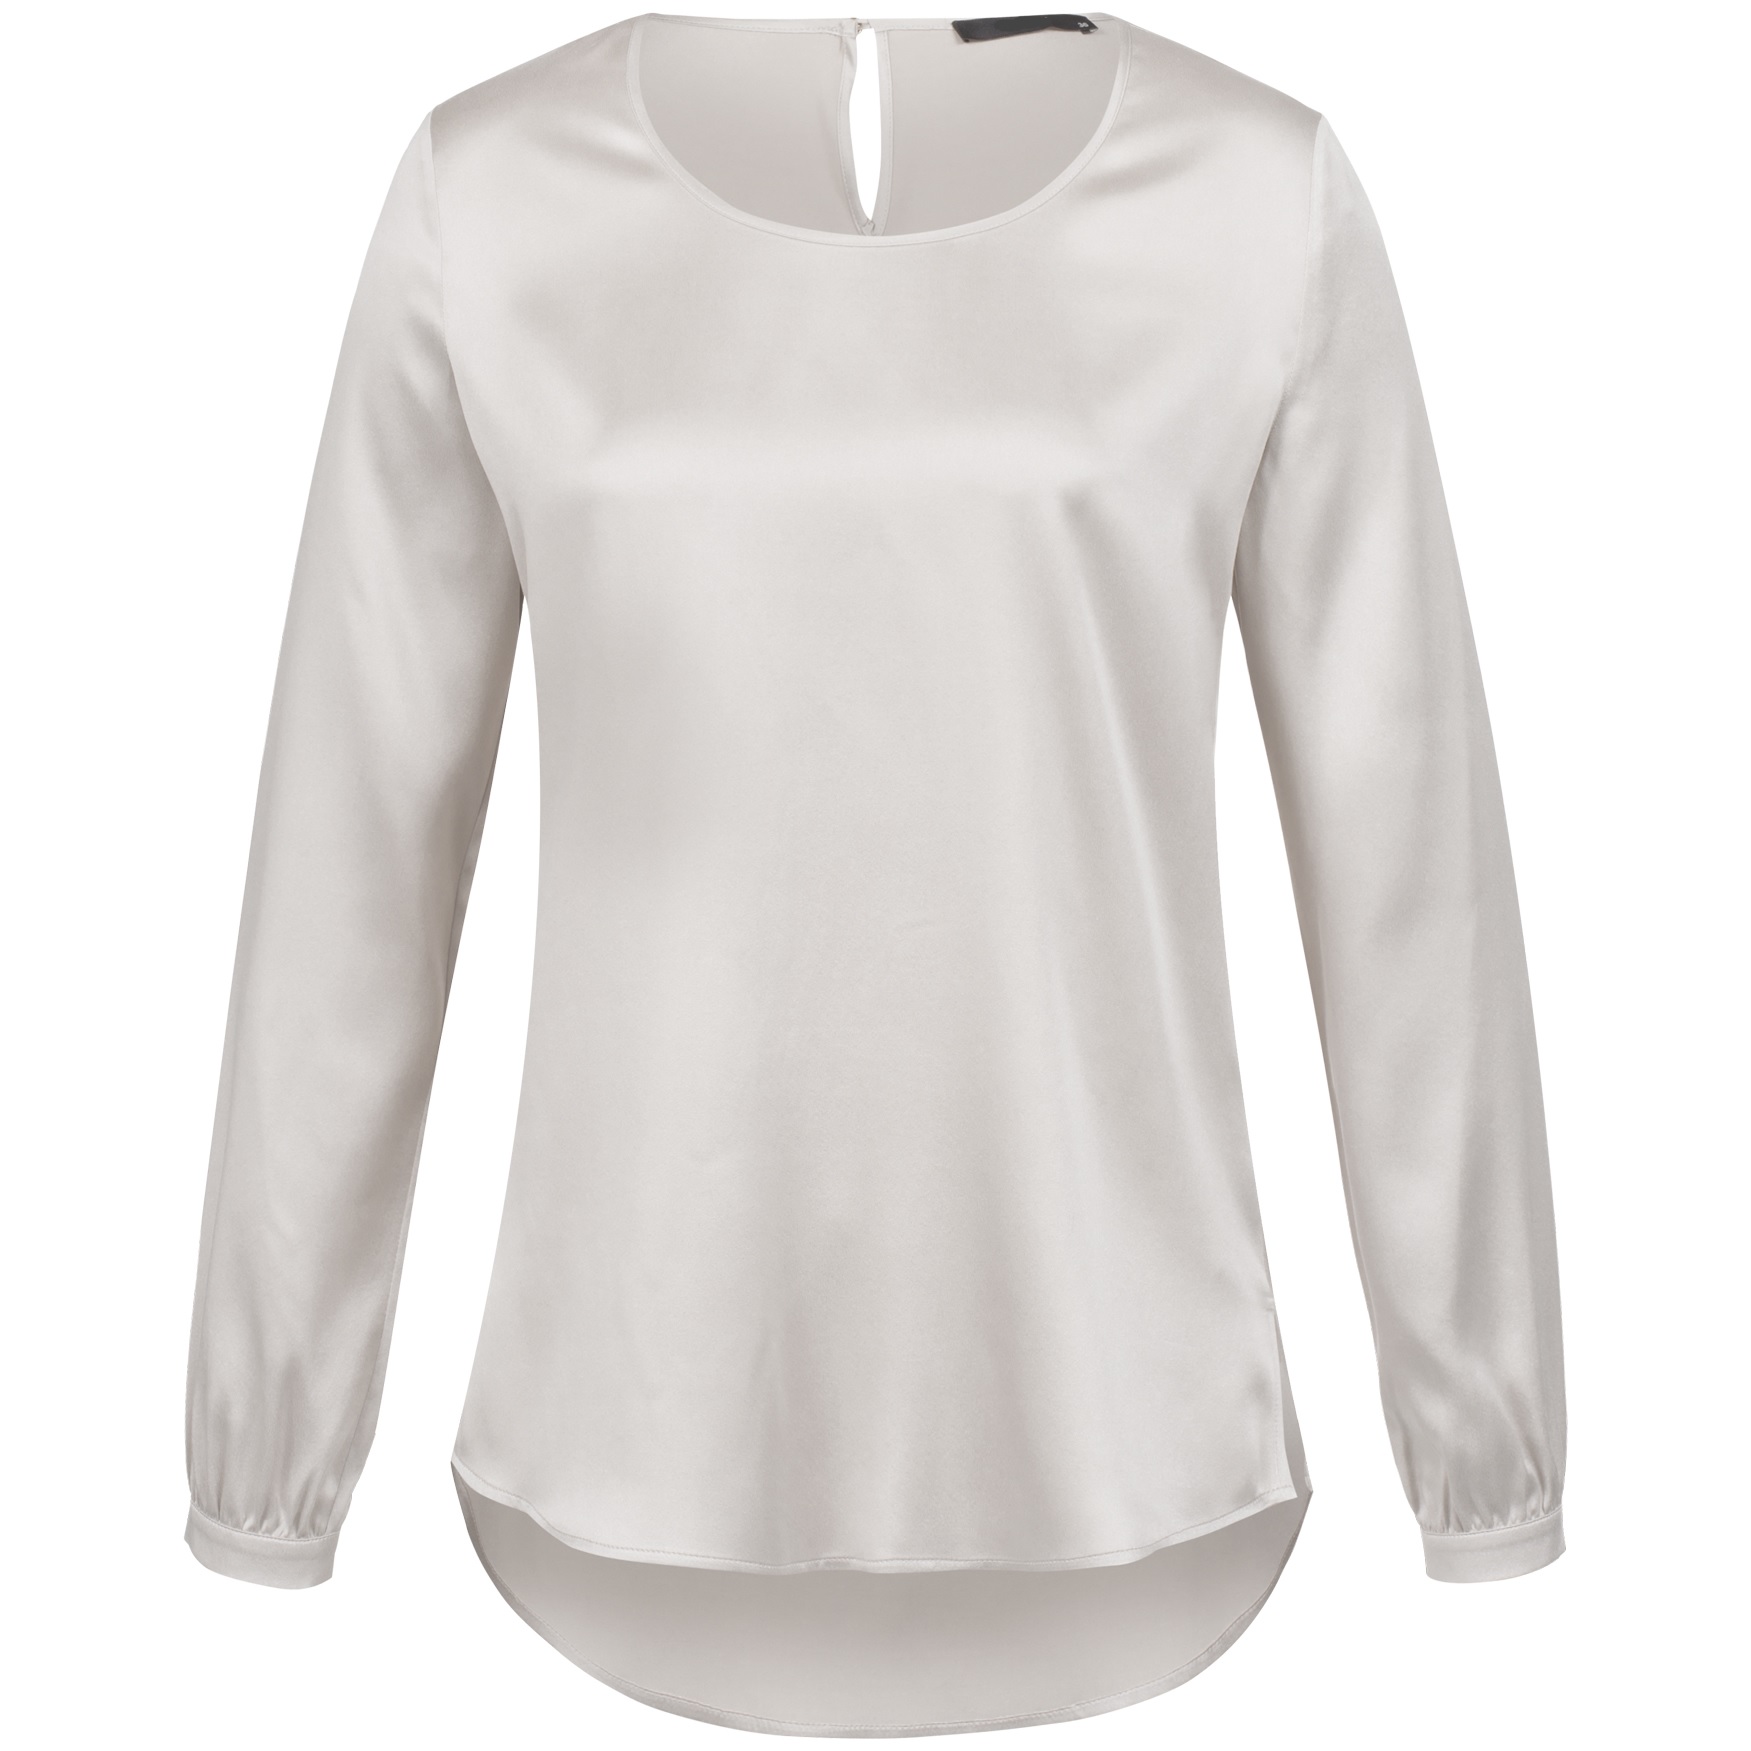 Women champagne Shirt with Long Sleeve